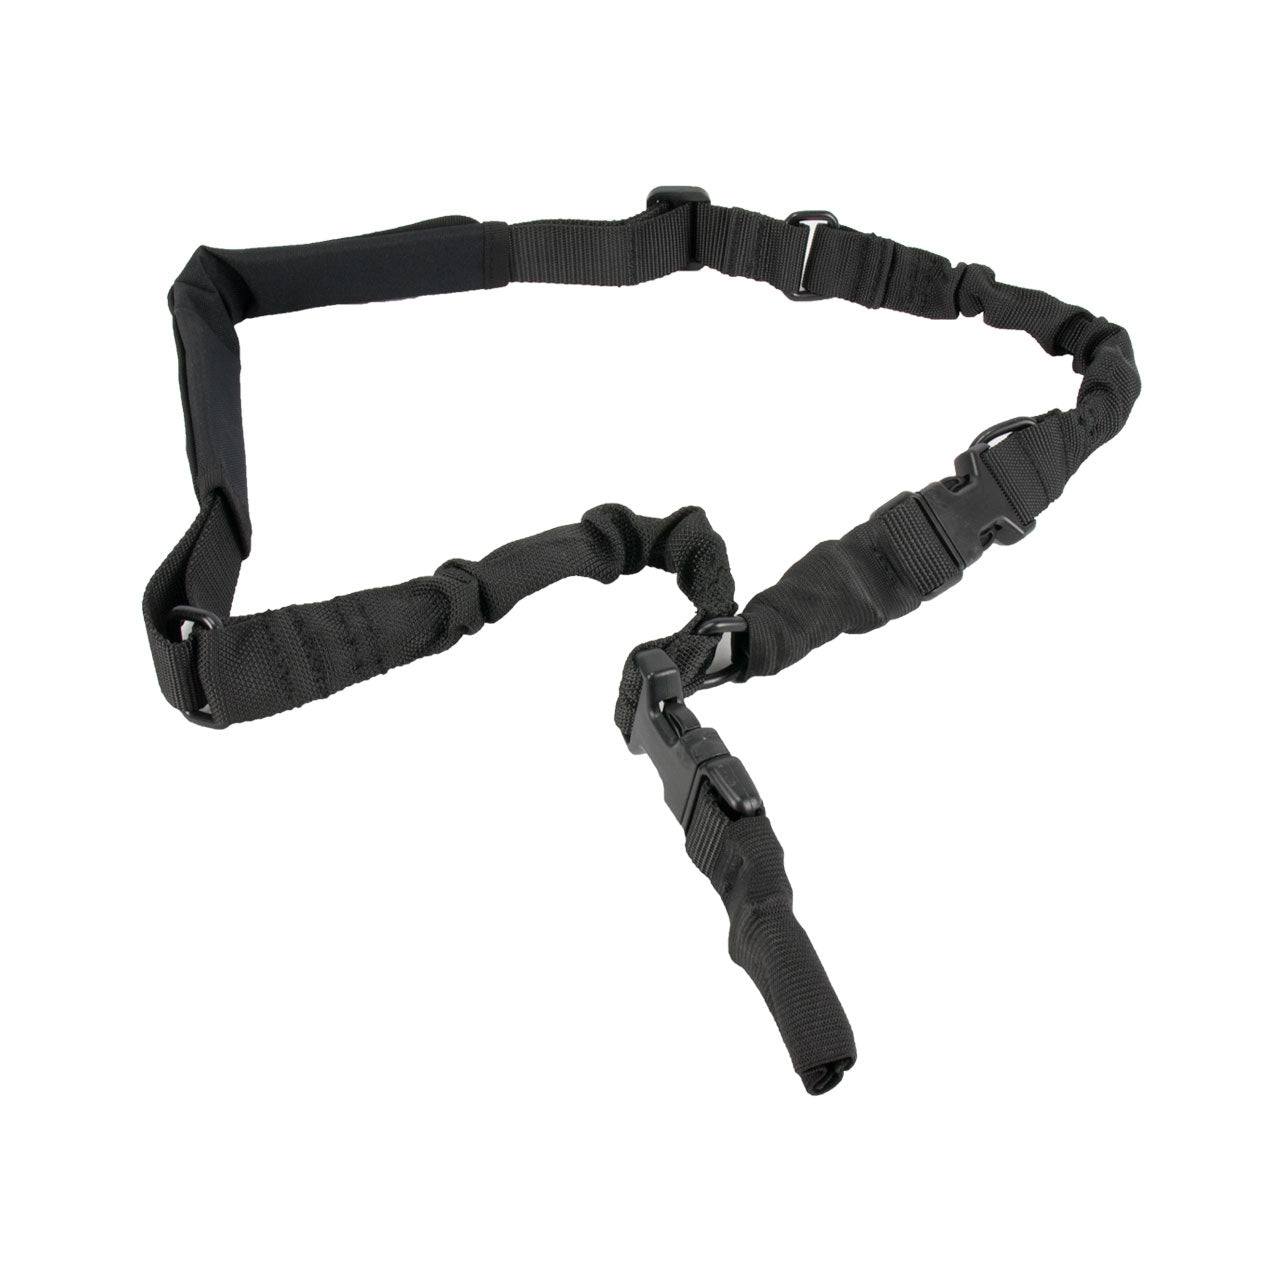 2-to-1 Point QD Tactical Rifle Sling - Black